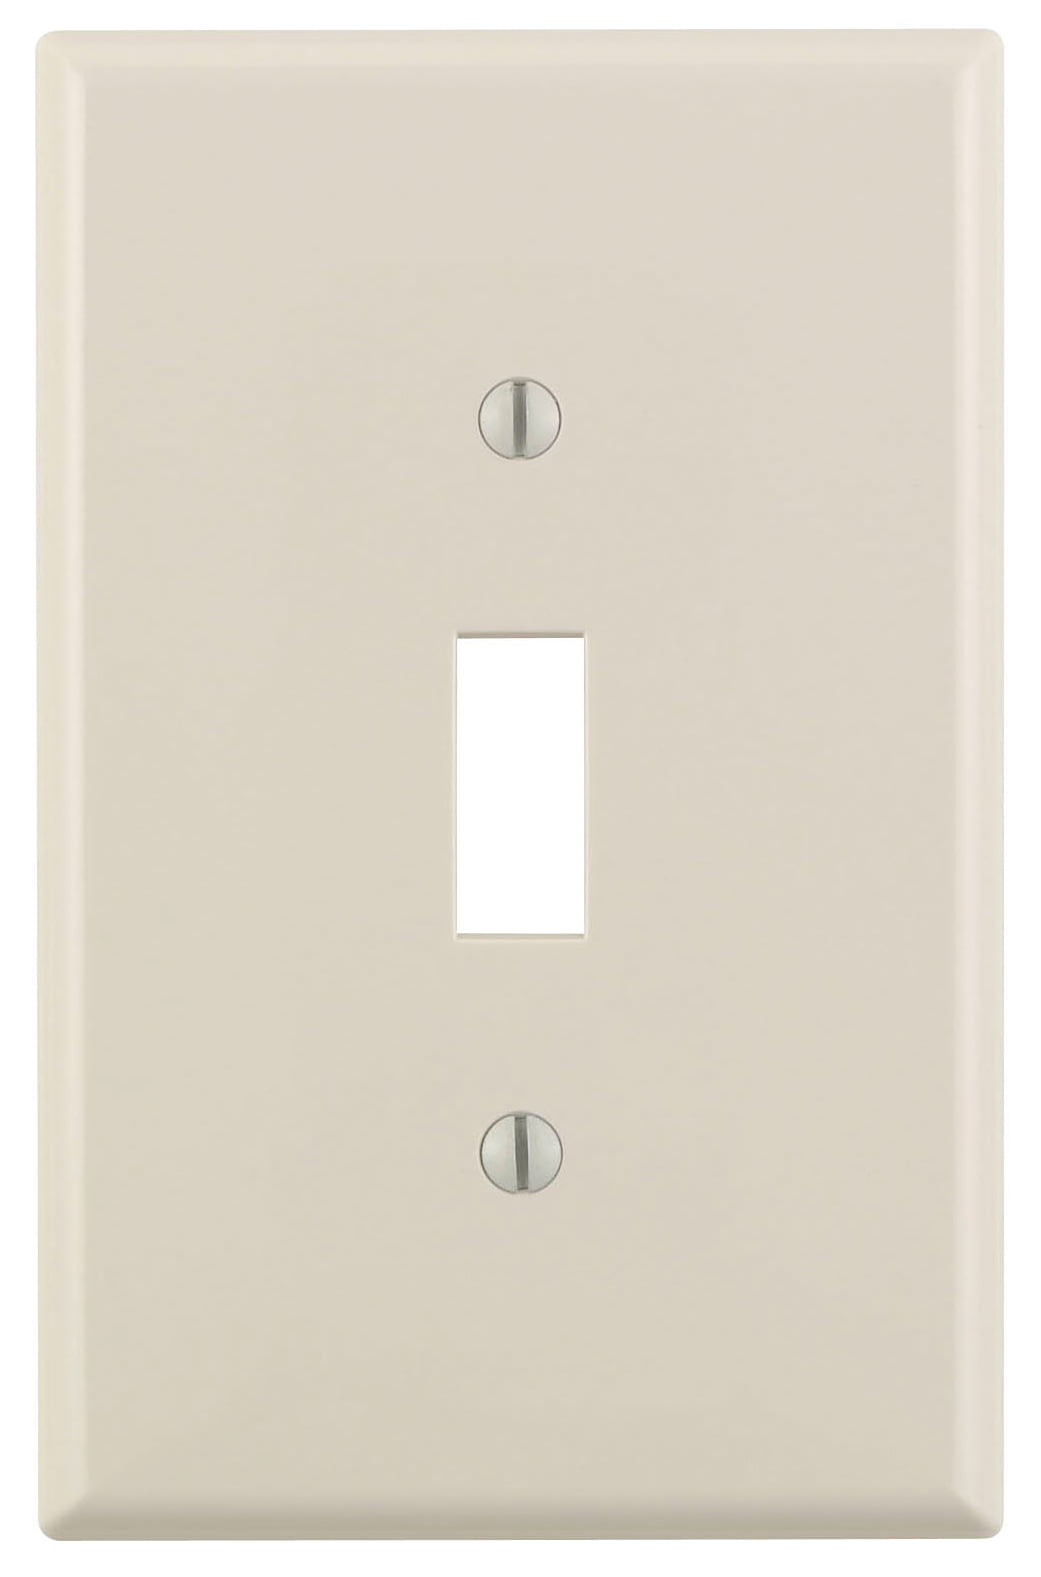 Eaton STE14W Polycarbonate 1-Gang Blank Sectional Mid Size End Wall Plate White 